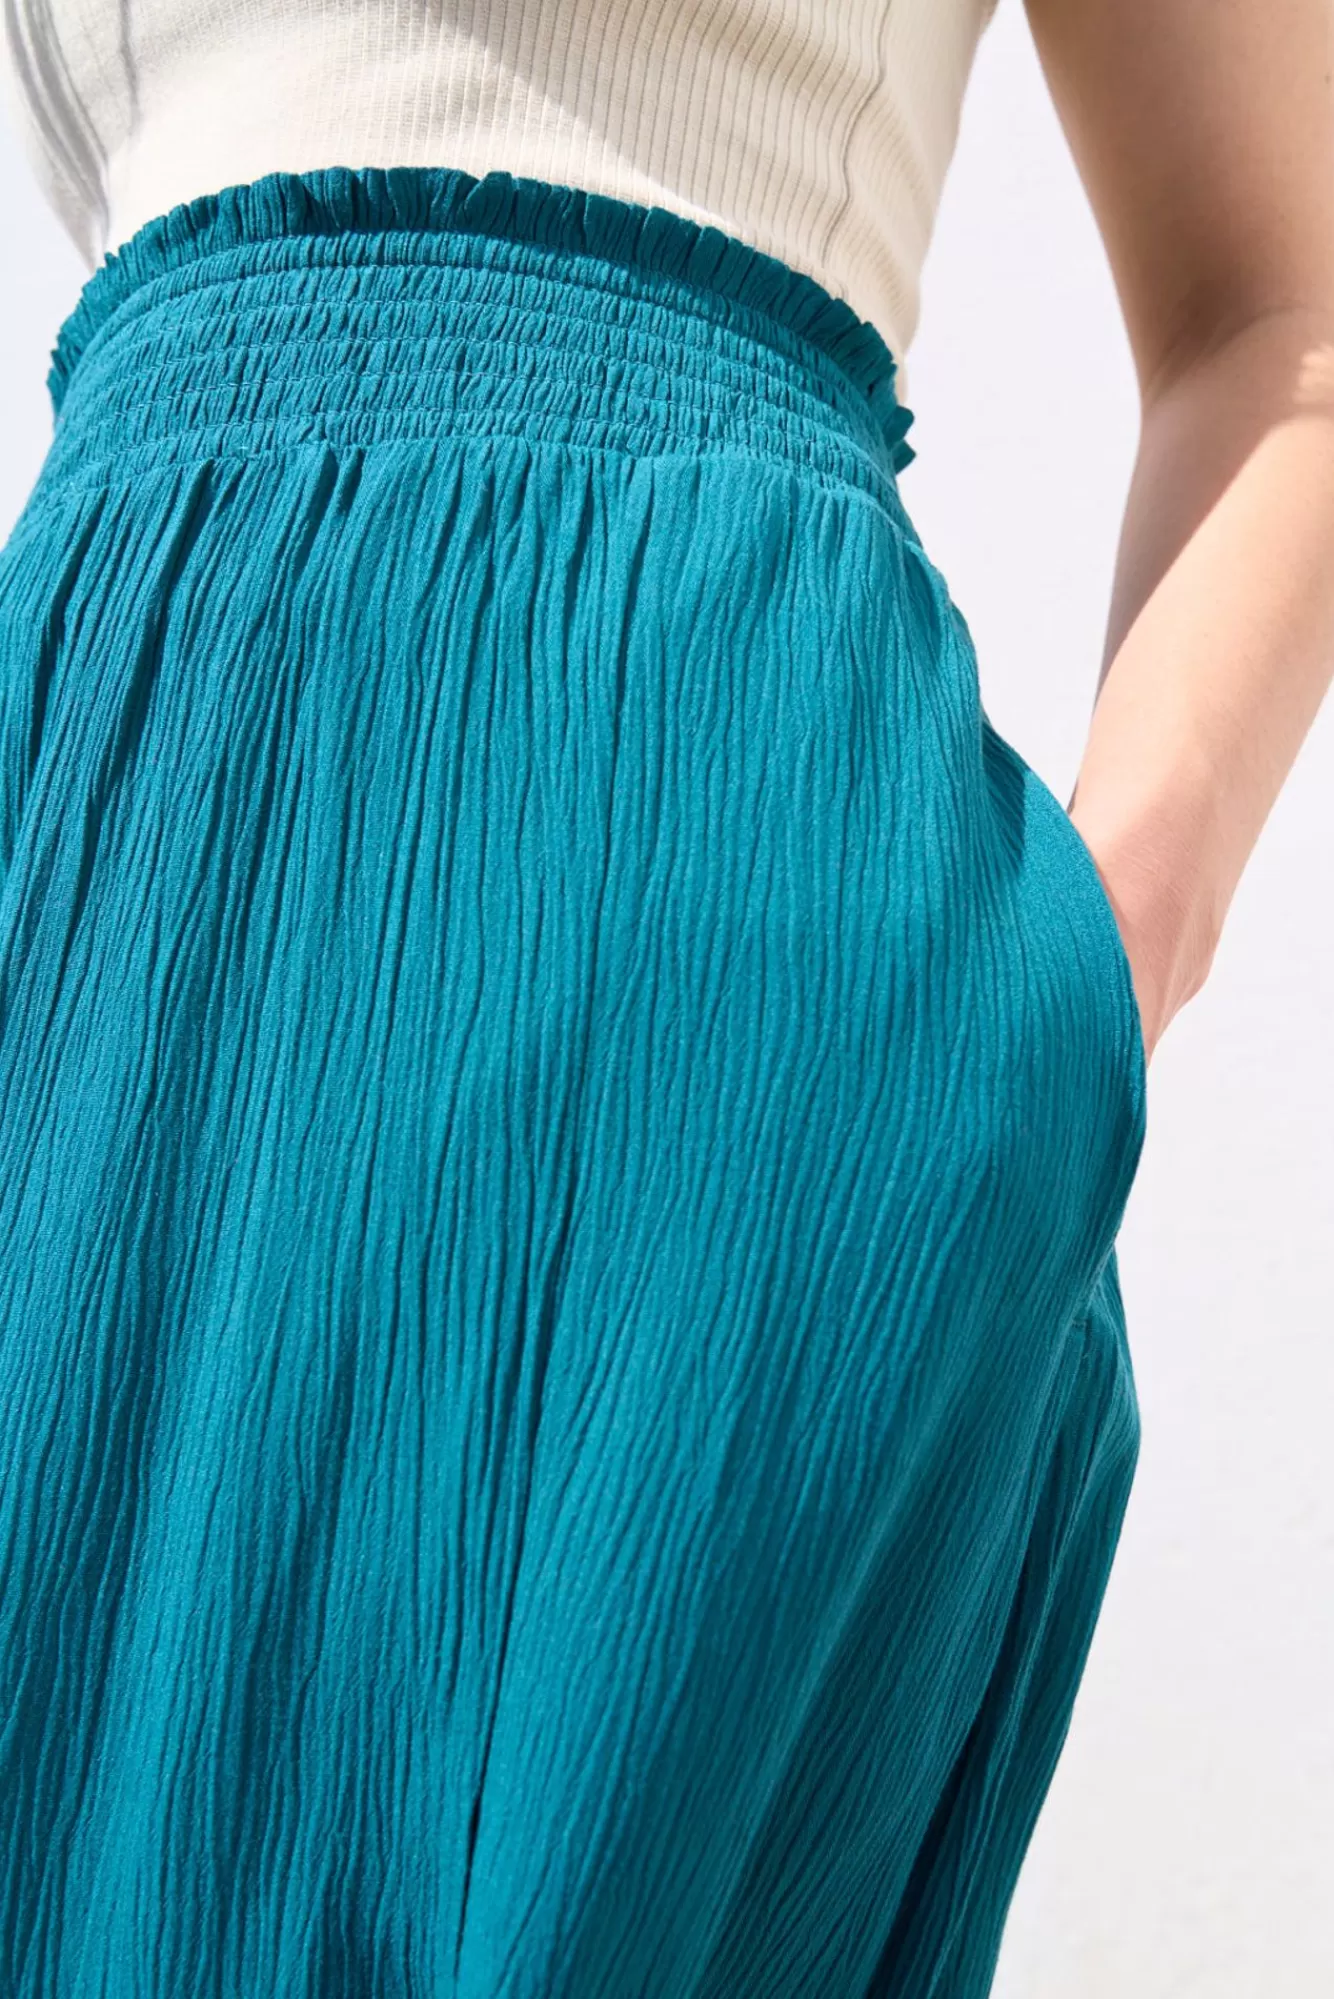 Poppy Skirt: Lenzing™ Ecovero™ - Pacific Teal-Lucy & Yak Sale